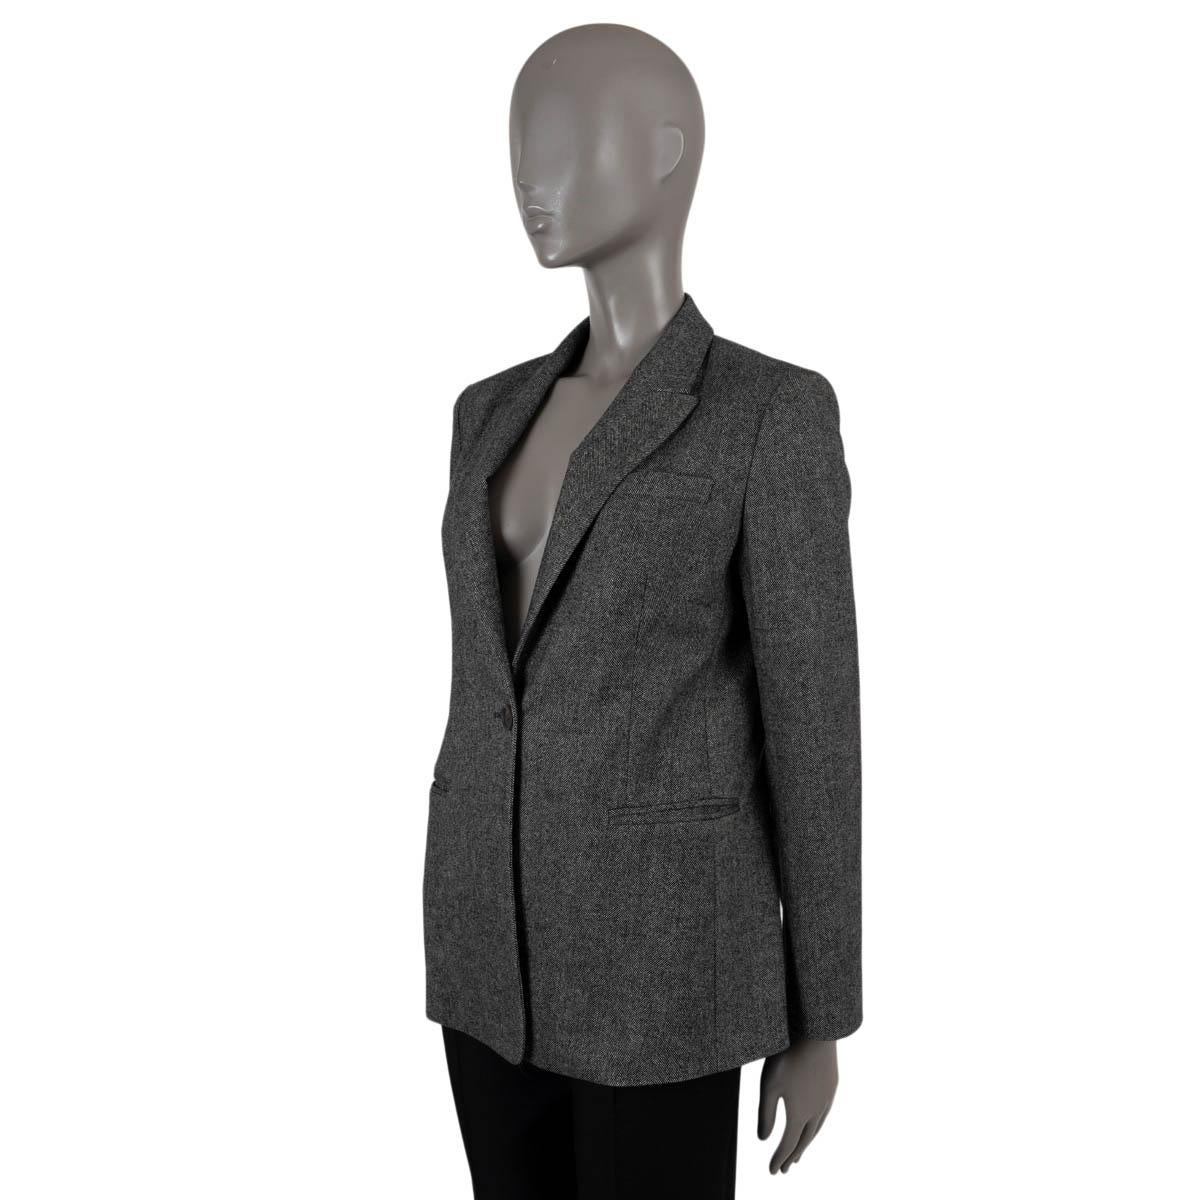 100% authentic Brunello Cucinelli Herringbone in black and white wool (94%), cashmere (5%) and elastane (1%). Features a tailored silhouette, a peak lapel, a chest and two welt pockets at the waist. Closes with a single horn button. Lined in silk